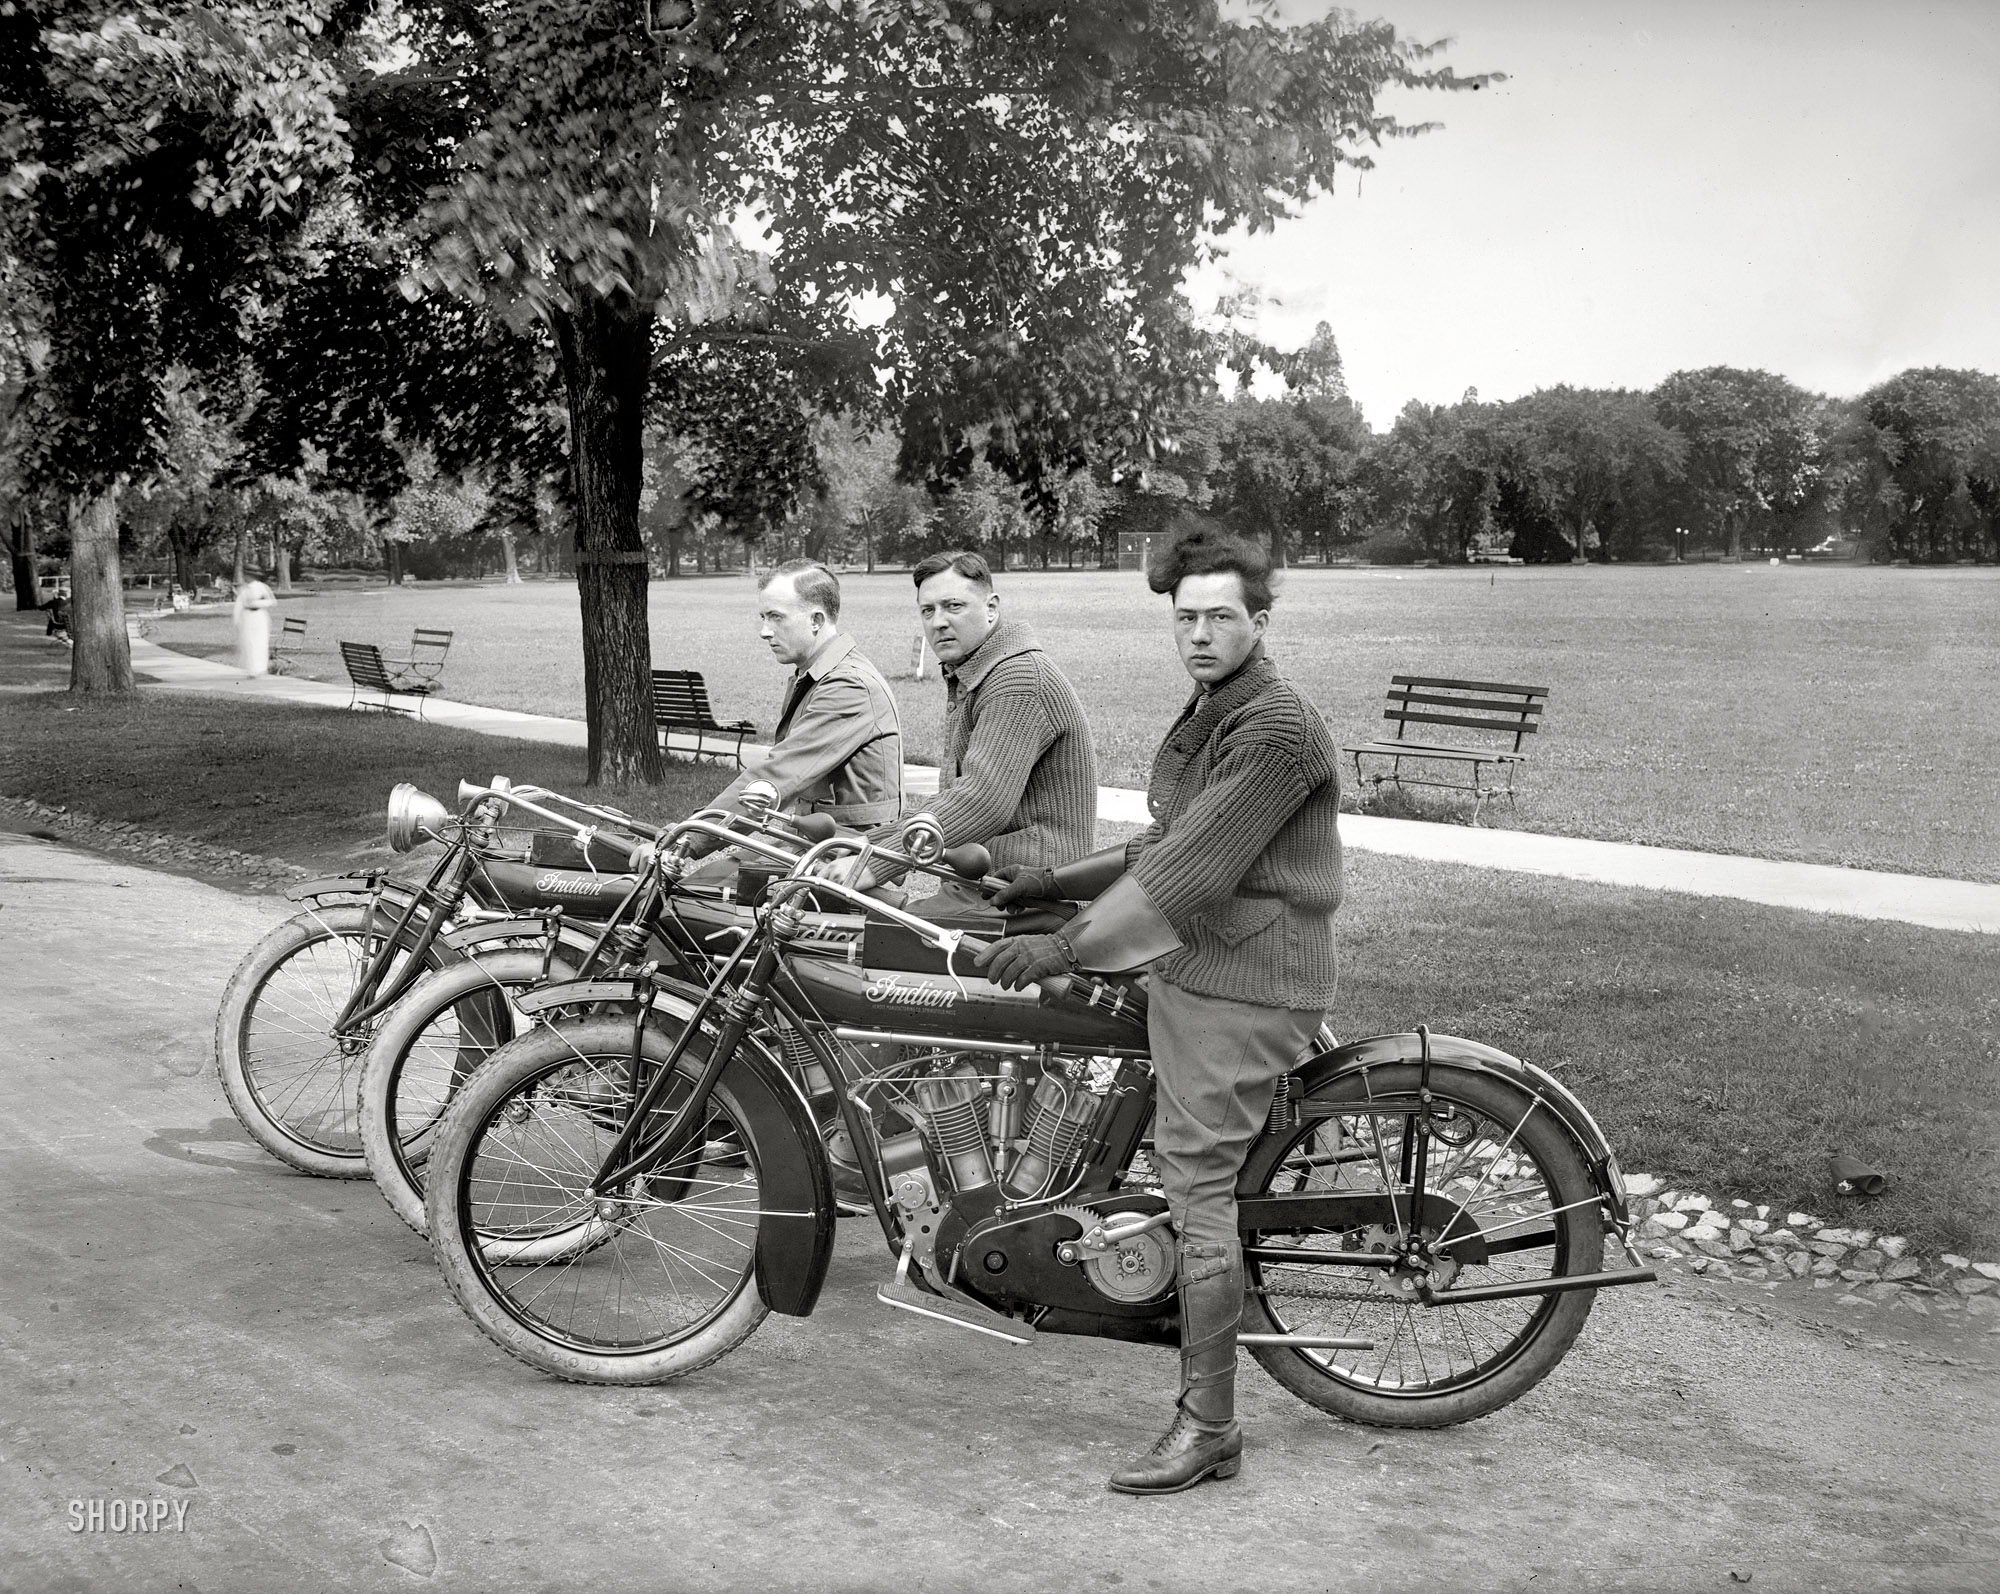 Washington, D.C., July 1915. "Motorcycle team, relay to Frisco." Frank S. Long, F.L. Leishear (whose Indian store we saw here) and Josiah McL. Seabrook. National Photo Company Collection glass negative. View full size.